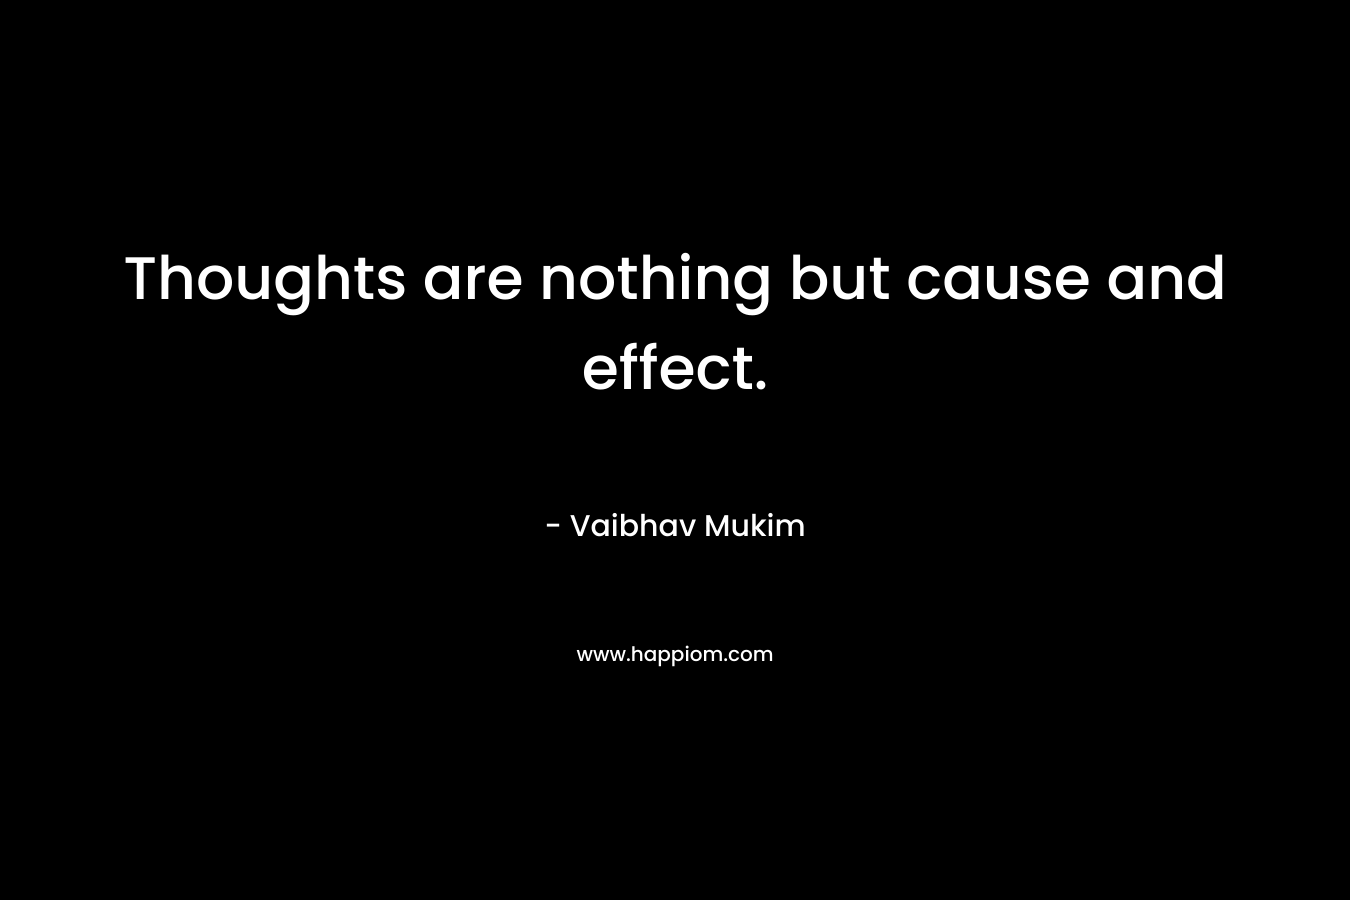 Thoughts are nothing but cause and effect.